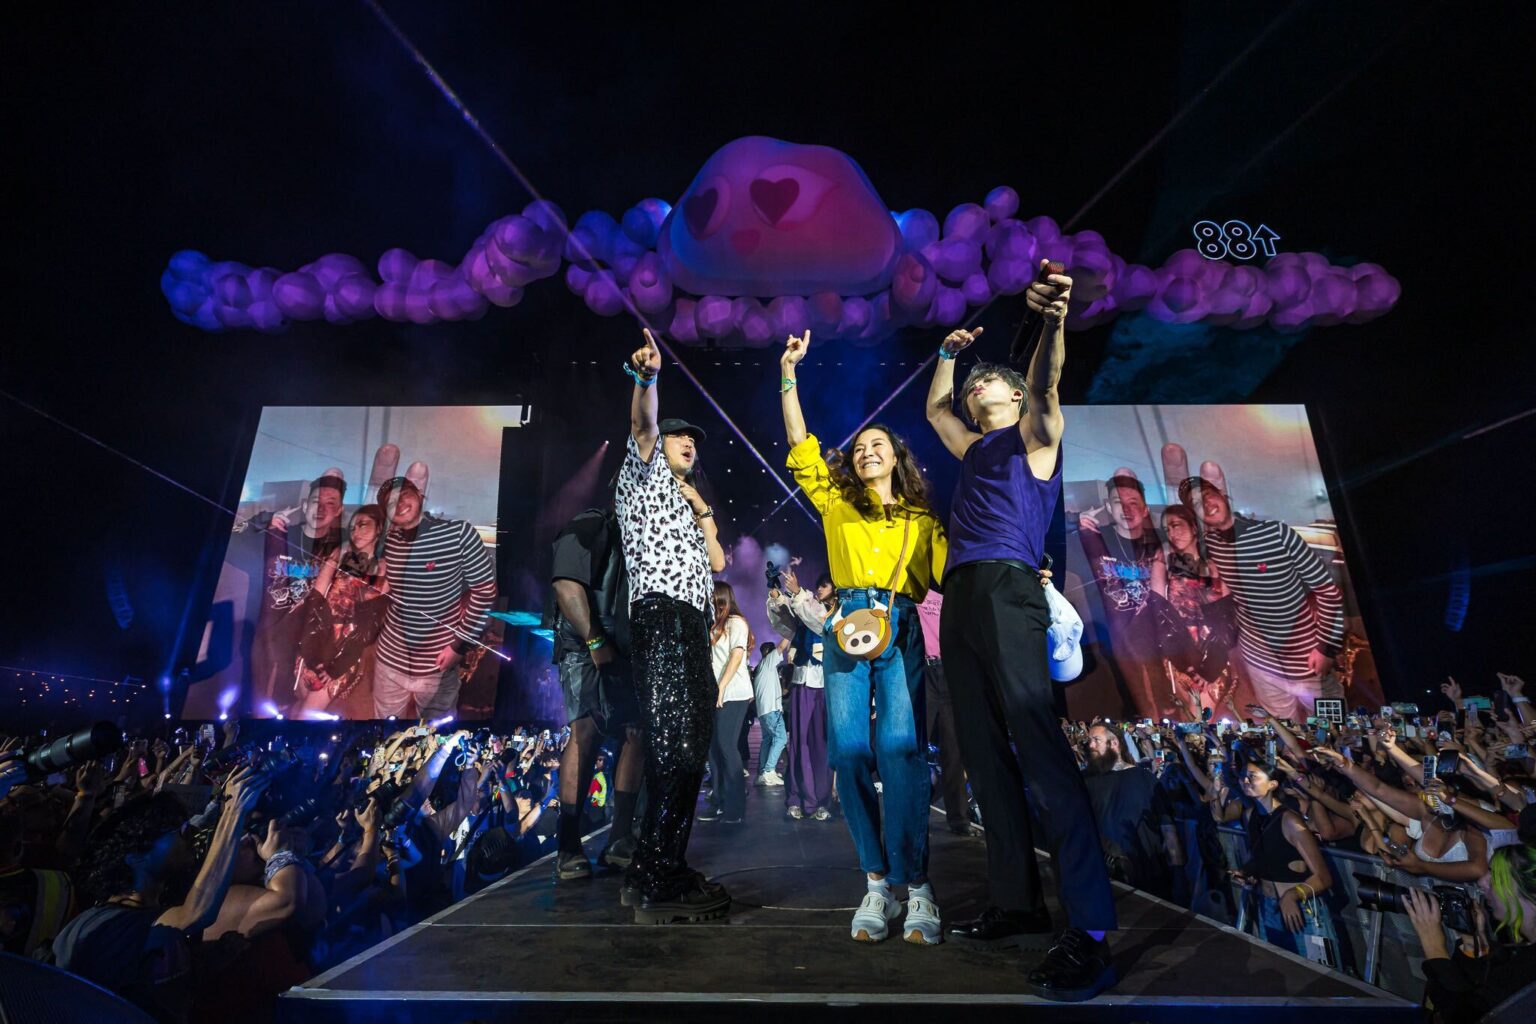 Rich Bran, Michelle Yeoh, and Jackson Wang on the Head In The Clouds stage in Los Angeles. The trio is flanked by screens and crowds, and the festival's trademark clouds are suspended above them.